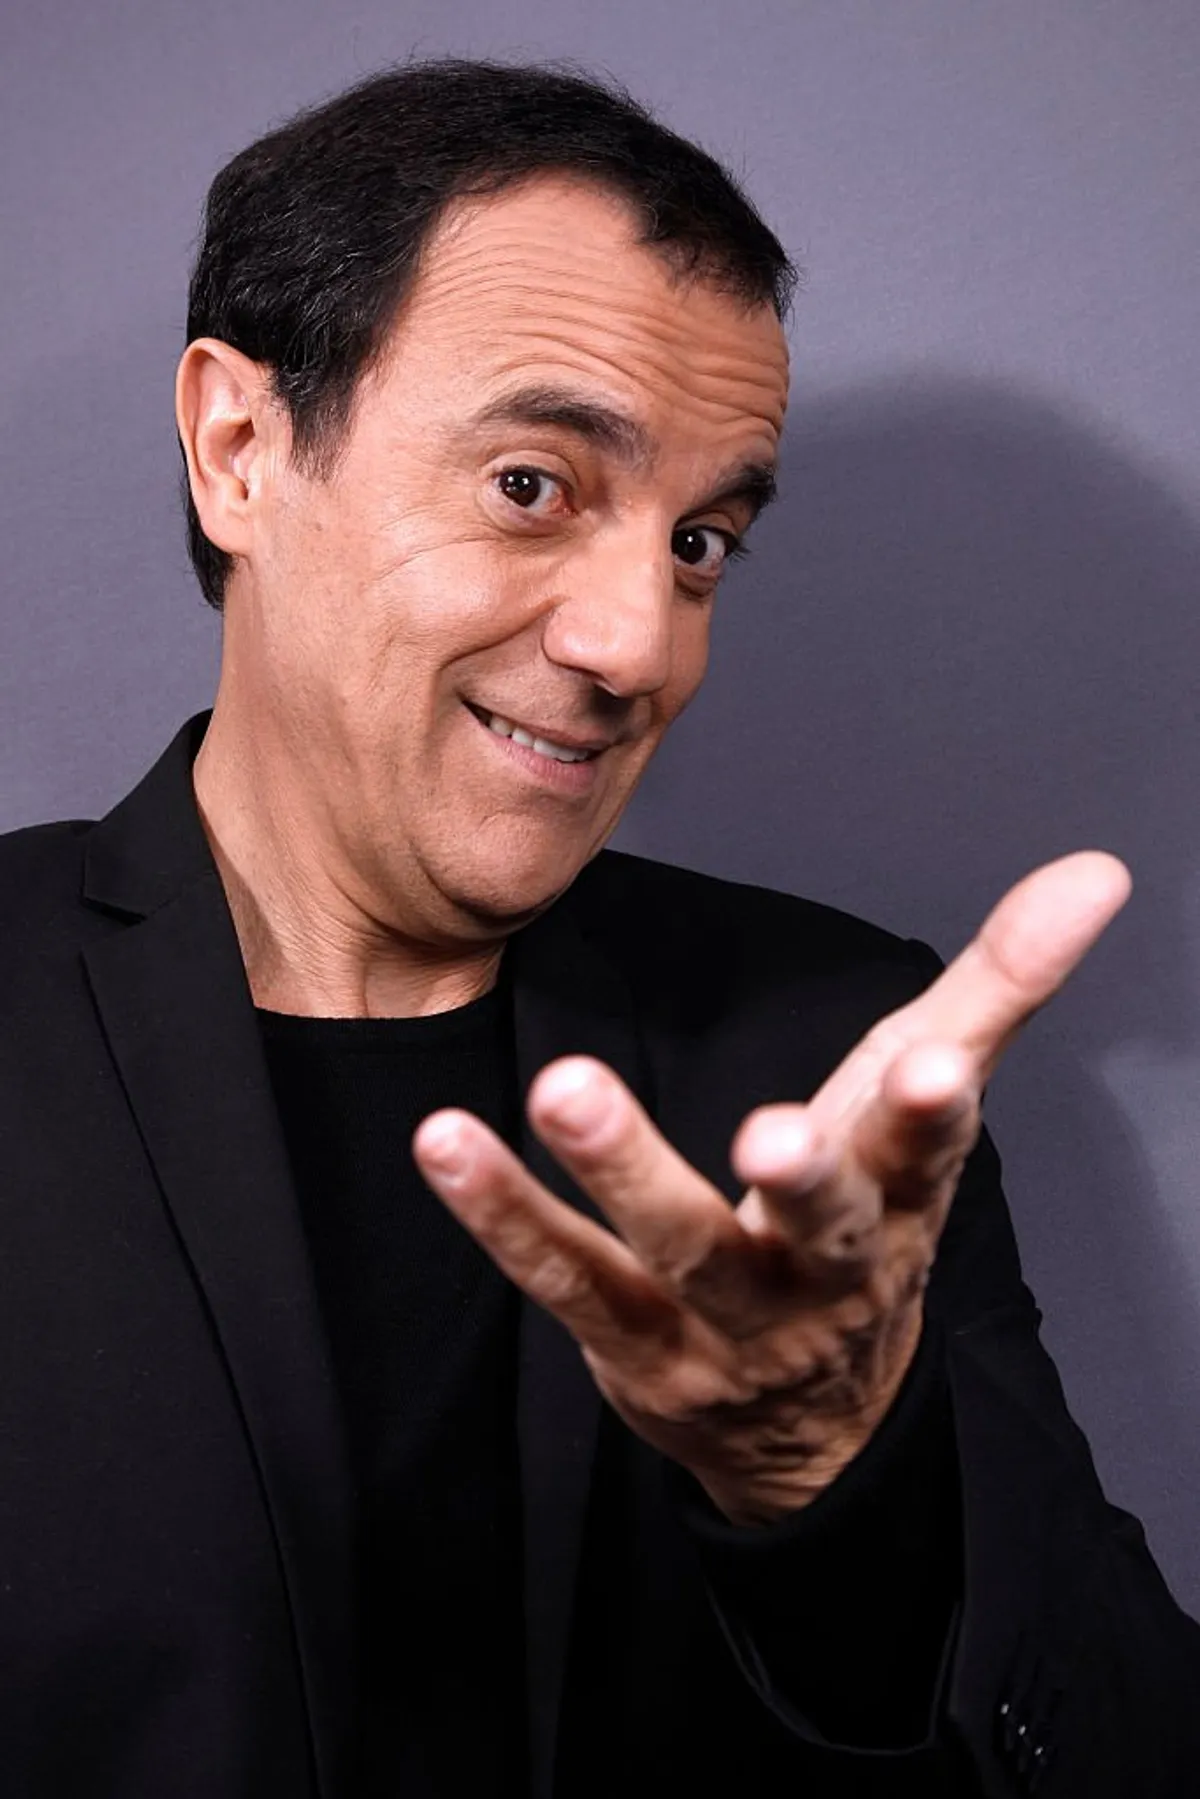 L'animateur Thierry Beccaro. | Photo : Getty Images